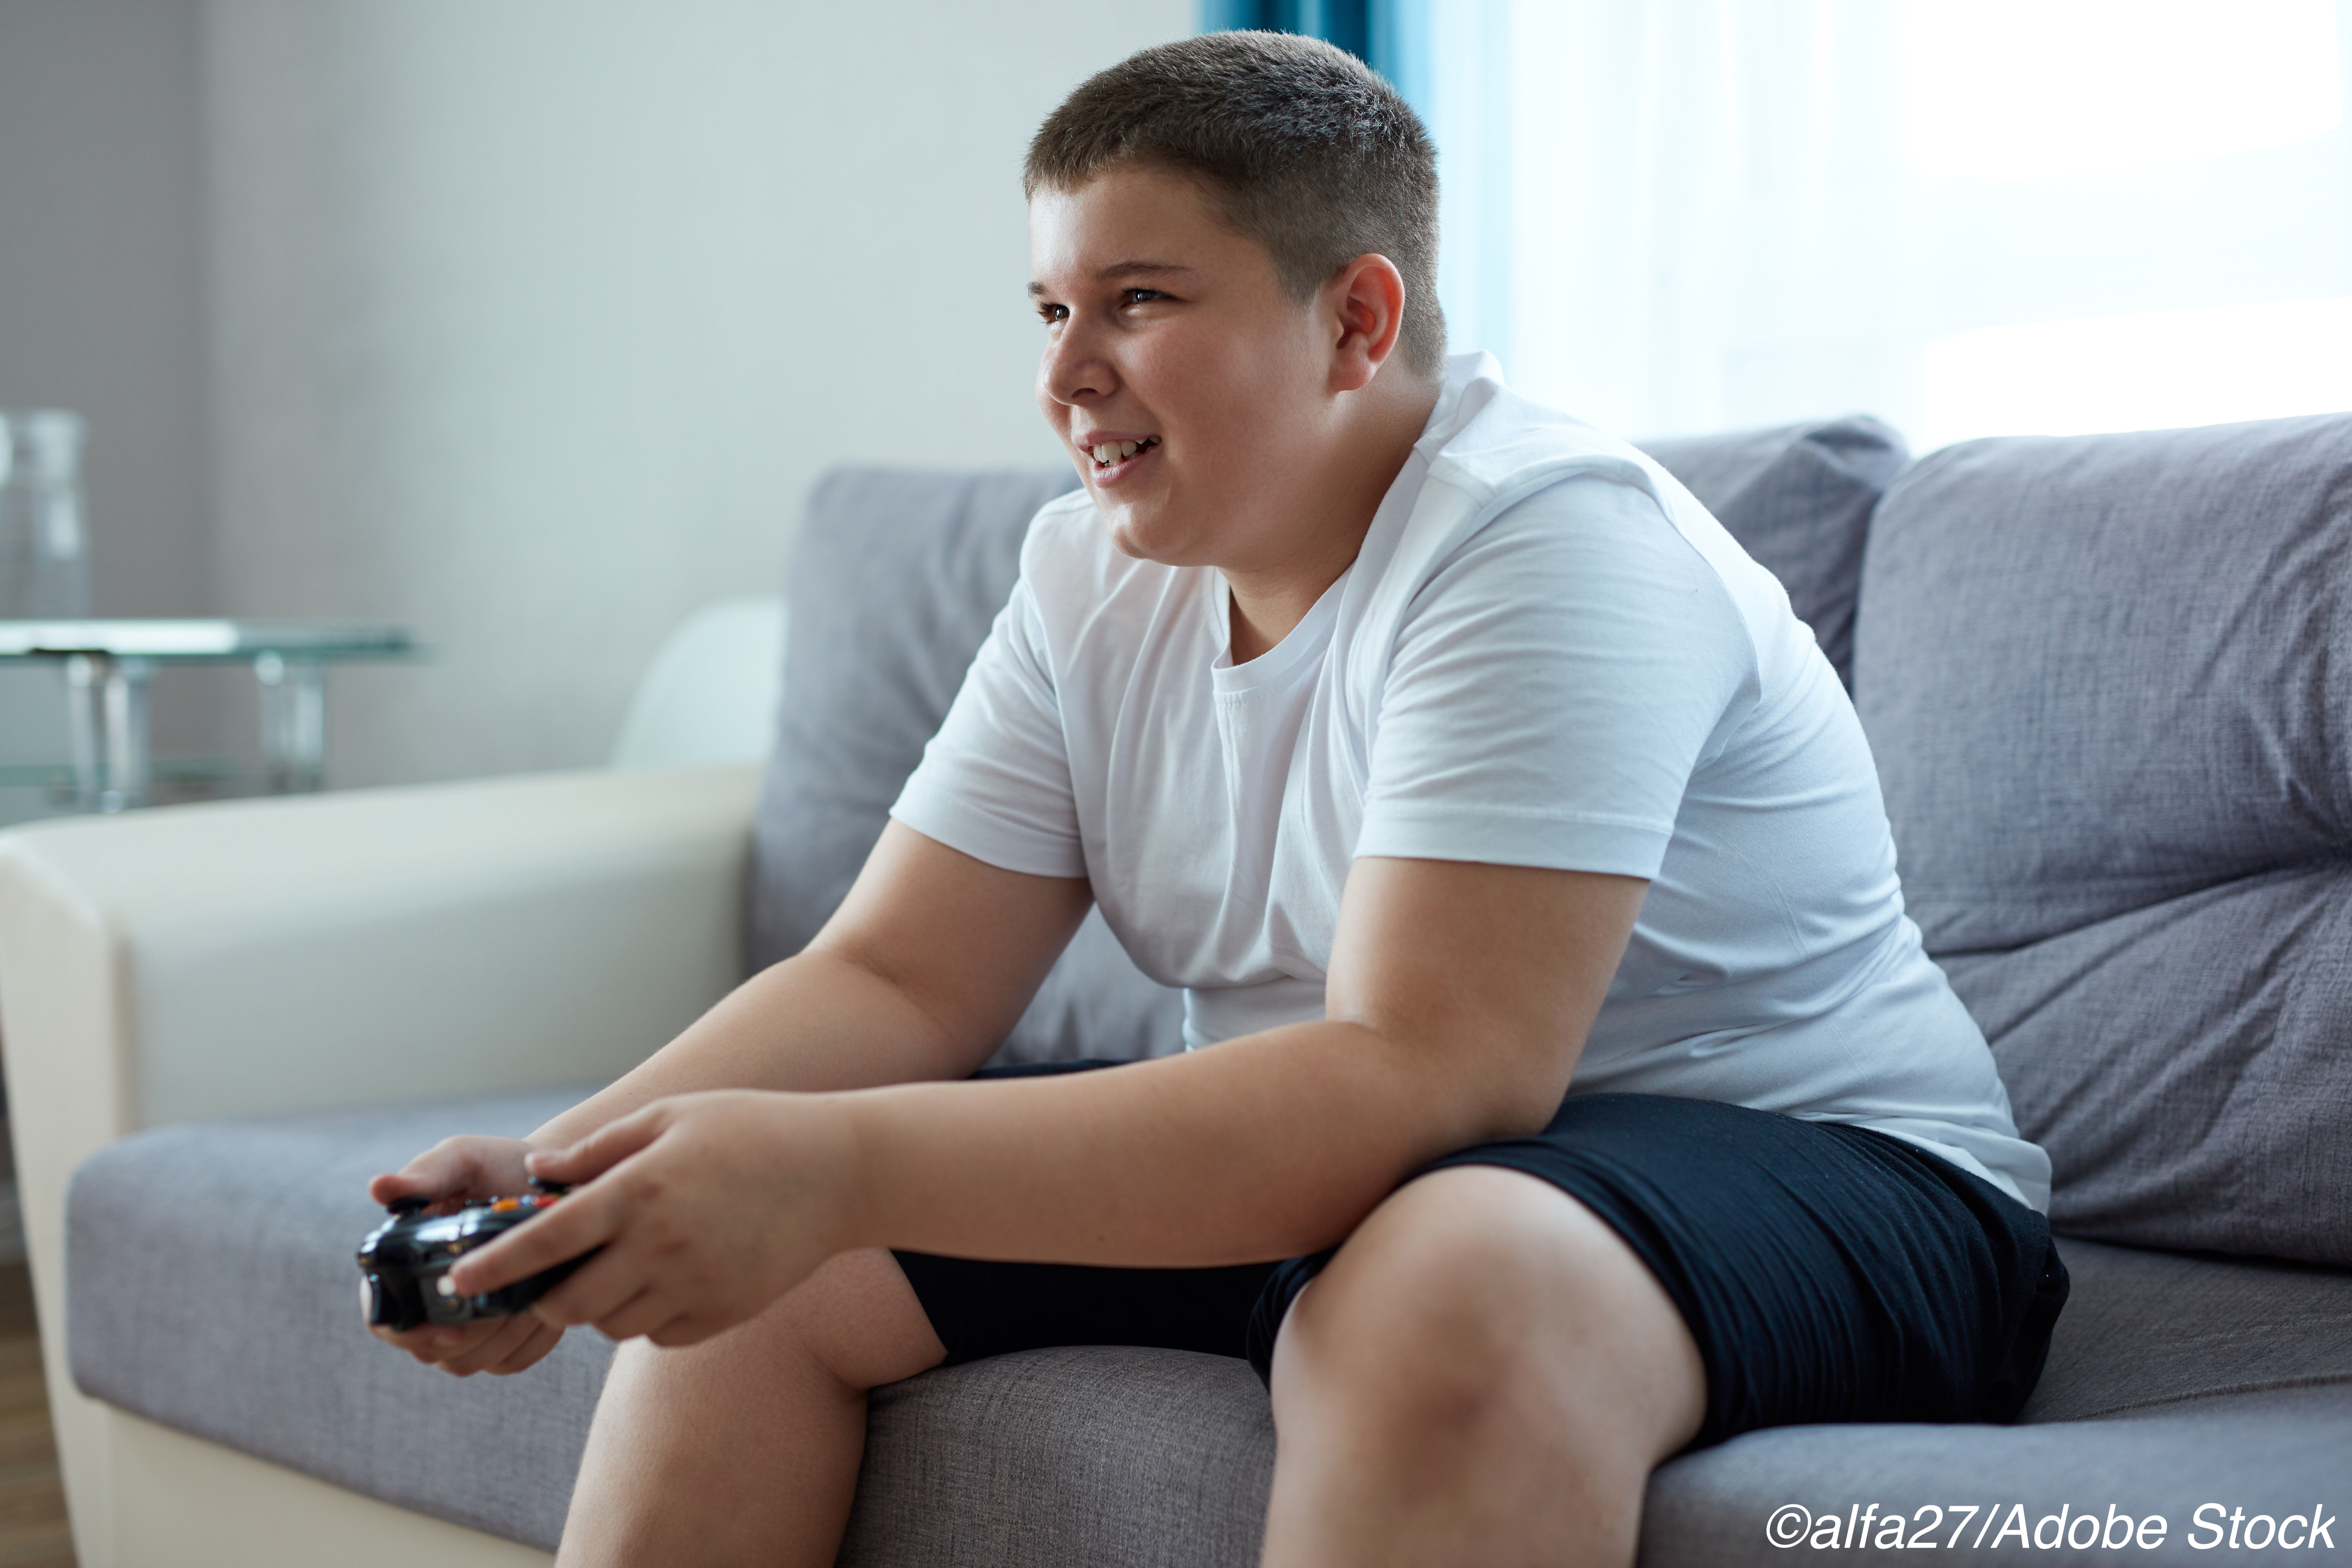 How Can Parents Best Help Teens with Obesity?